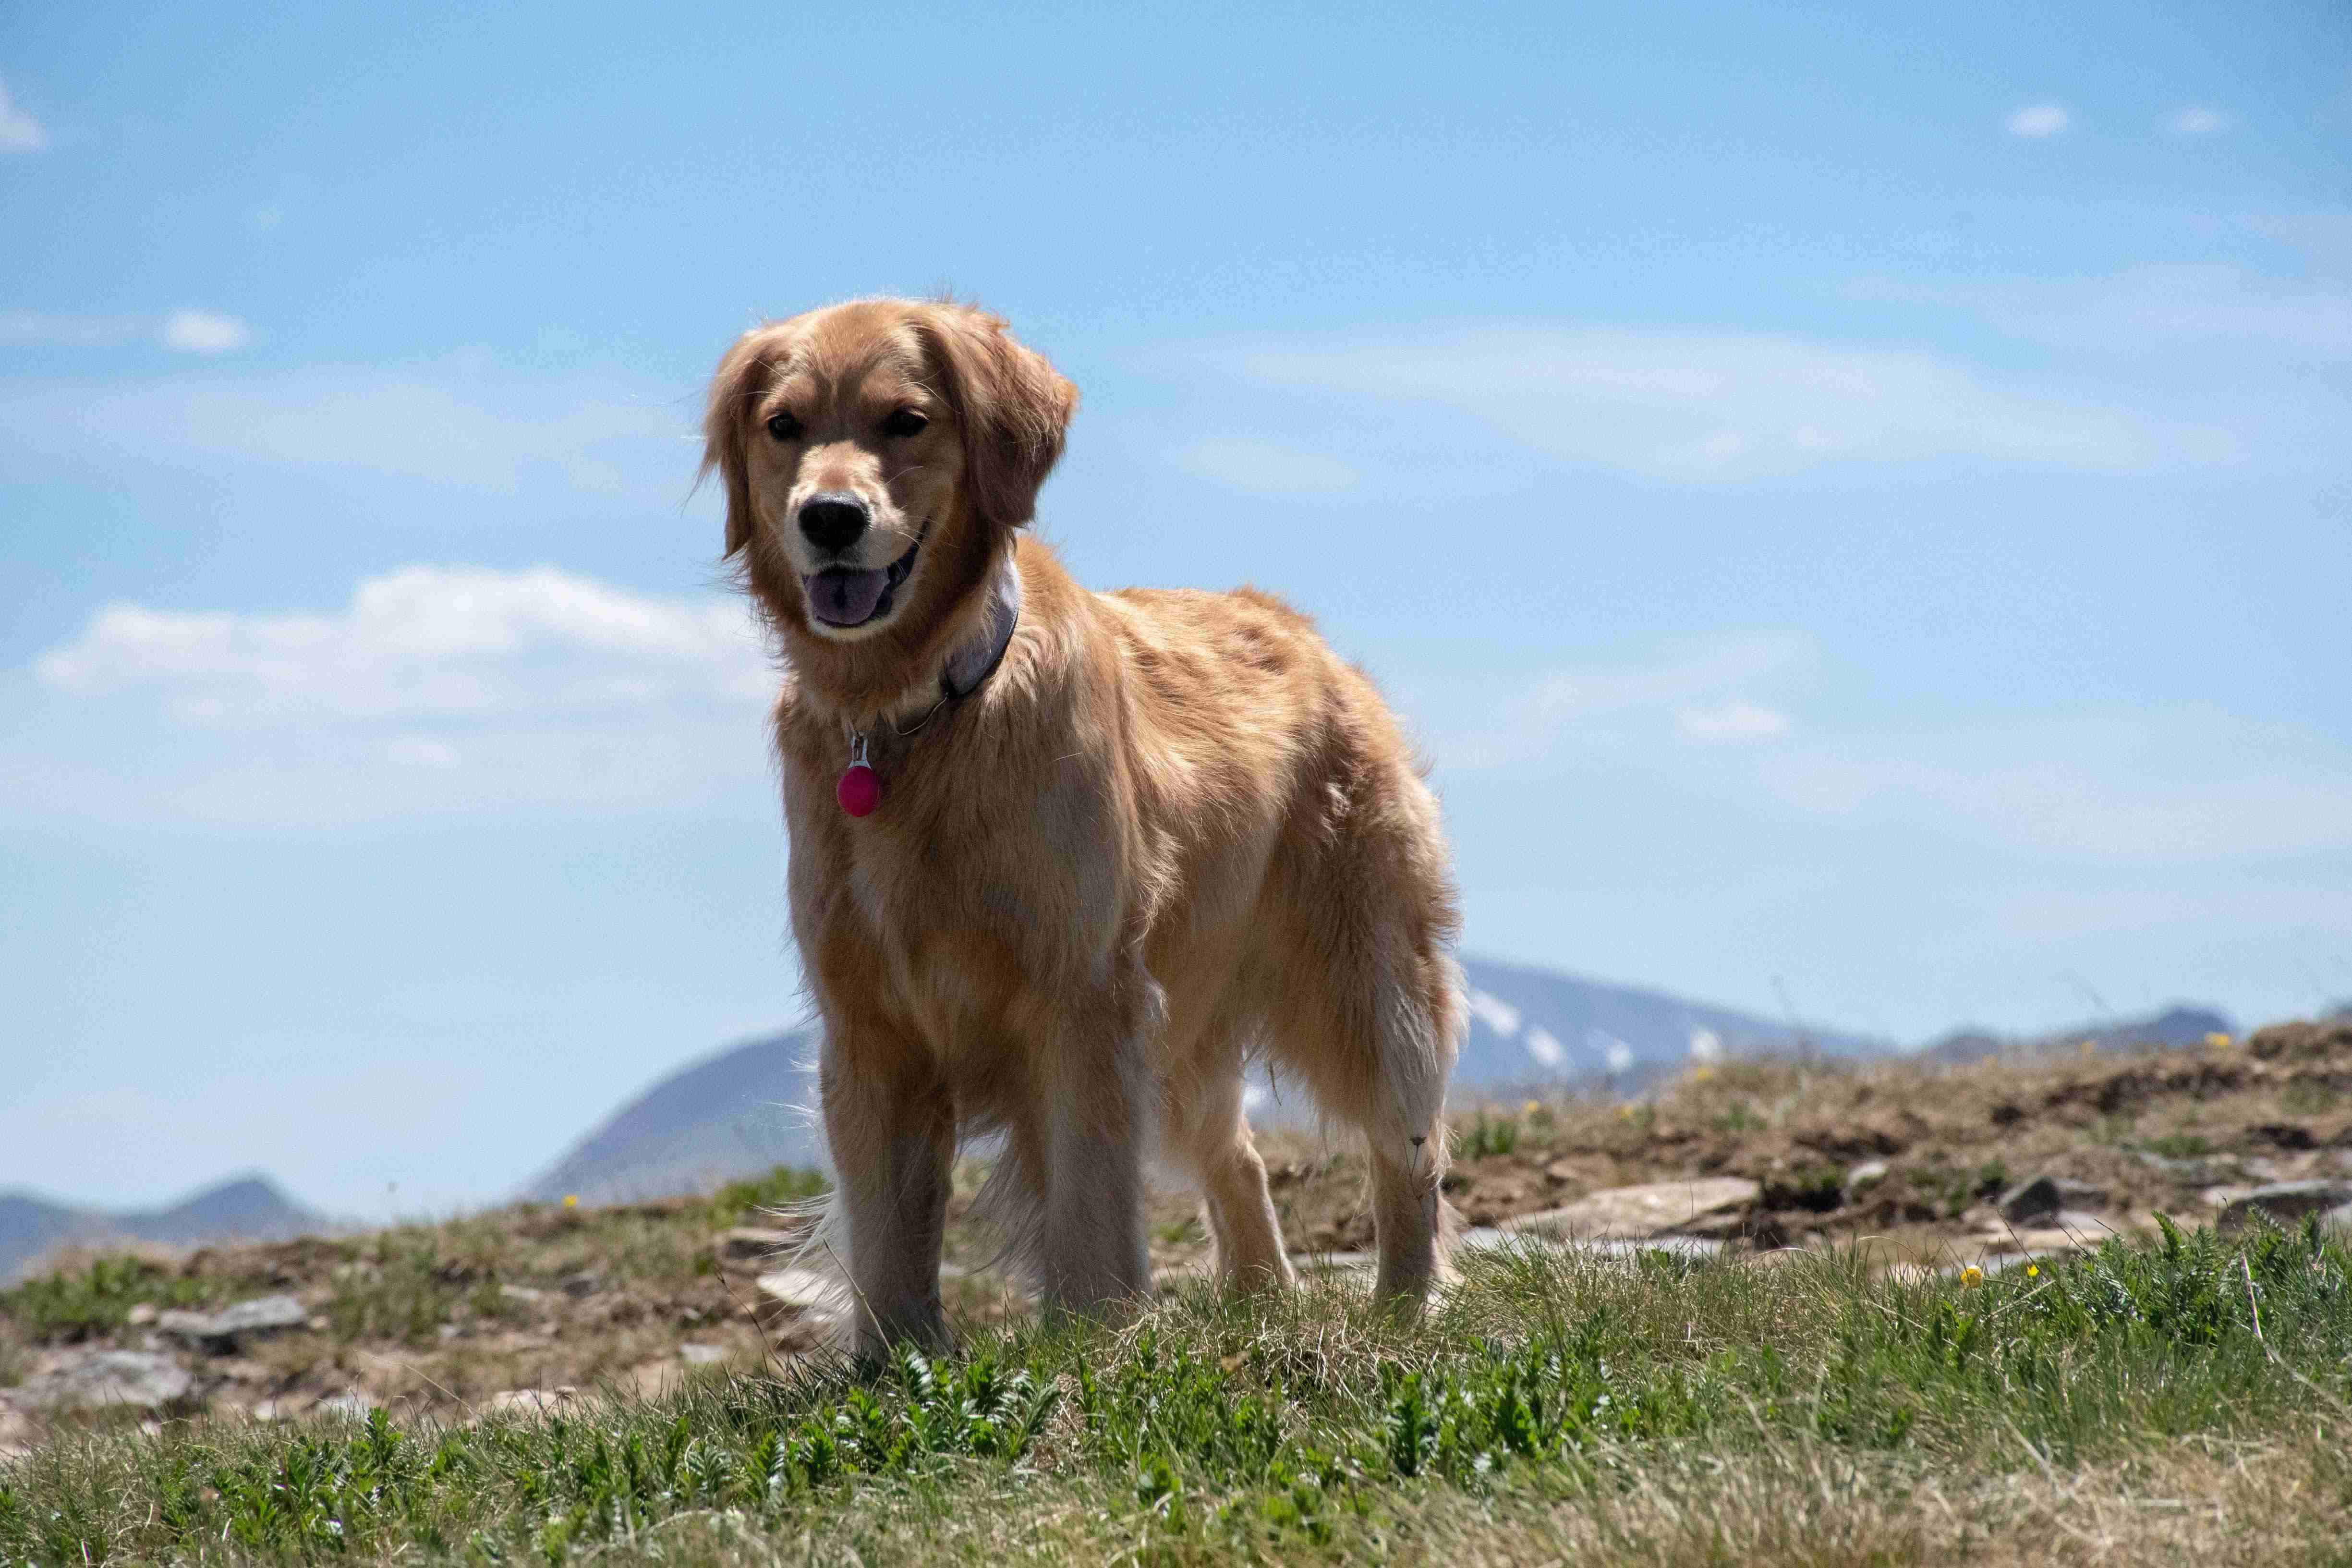 Building a Stronger Bond: Tips to Help Your Golden Retriever Puppy Connect with You